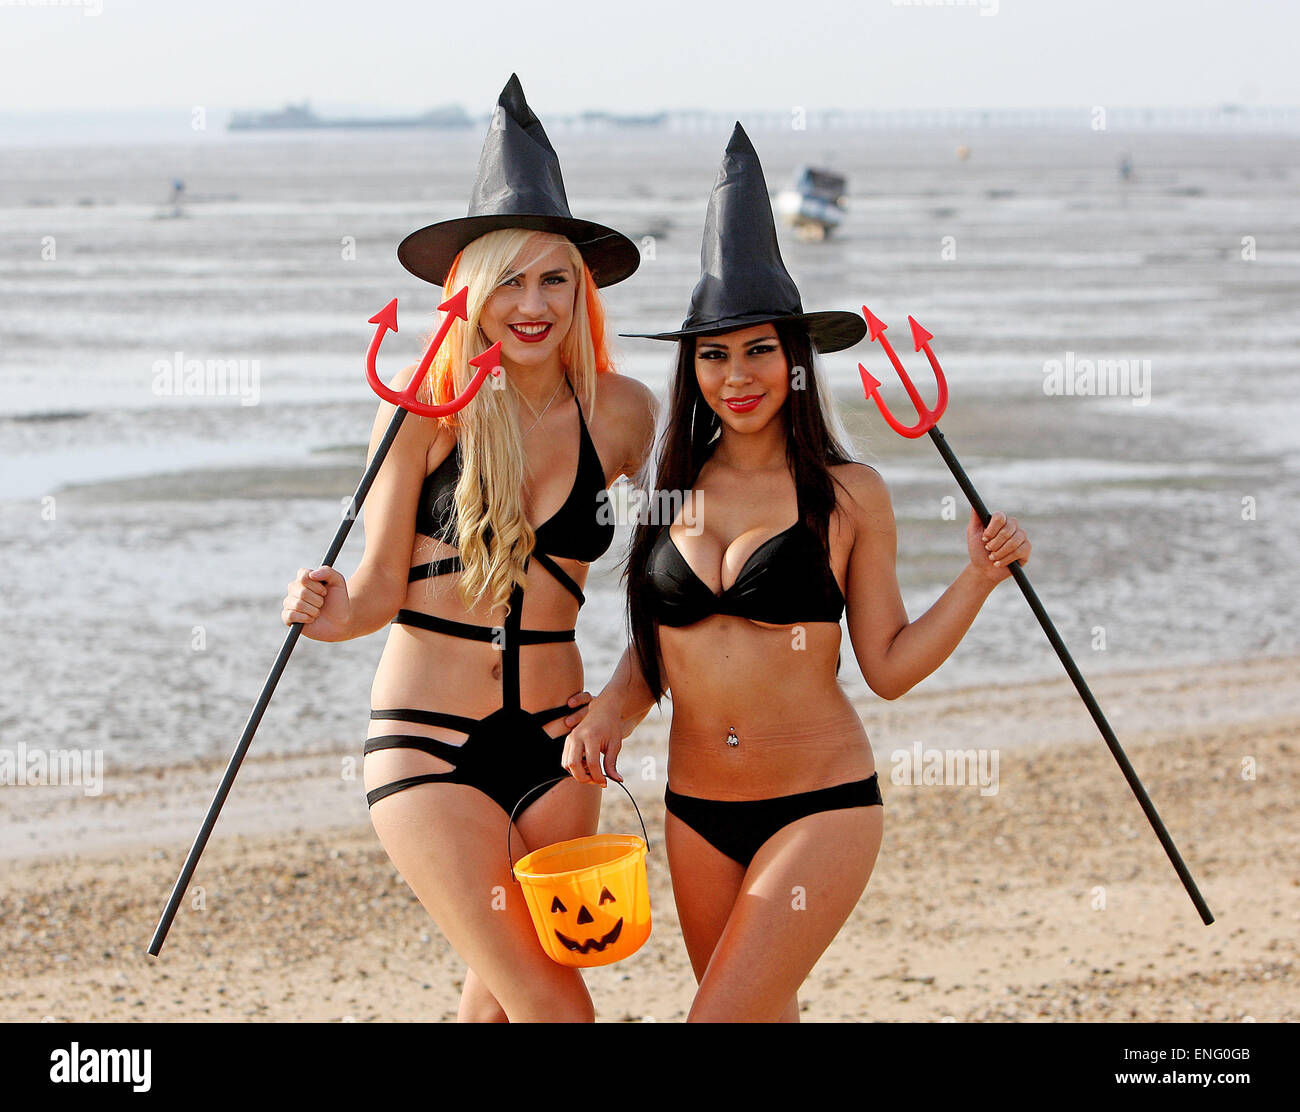 Dancers Sophie Lambert and Stephany Paredes pose together on Southend  beach, wearing skimpy Halloween outfits. Featuring: Sophie Lambert,Stephany  Parades Where: Southend, United Kingdom When: 31 Oct 2014 Stock Photo -  Alamy